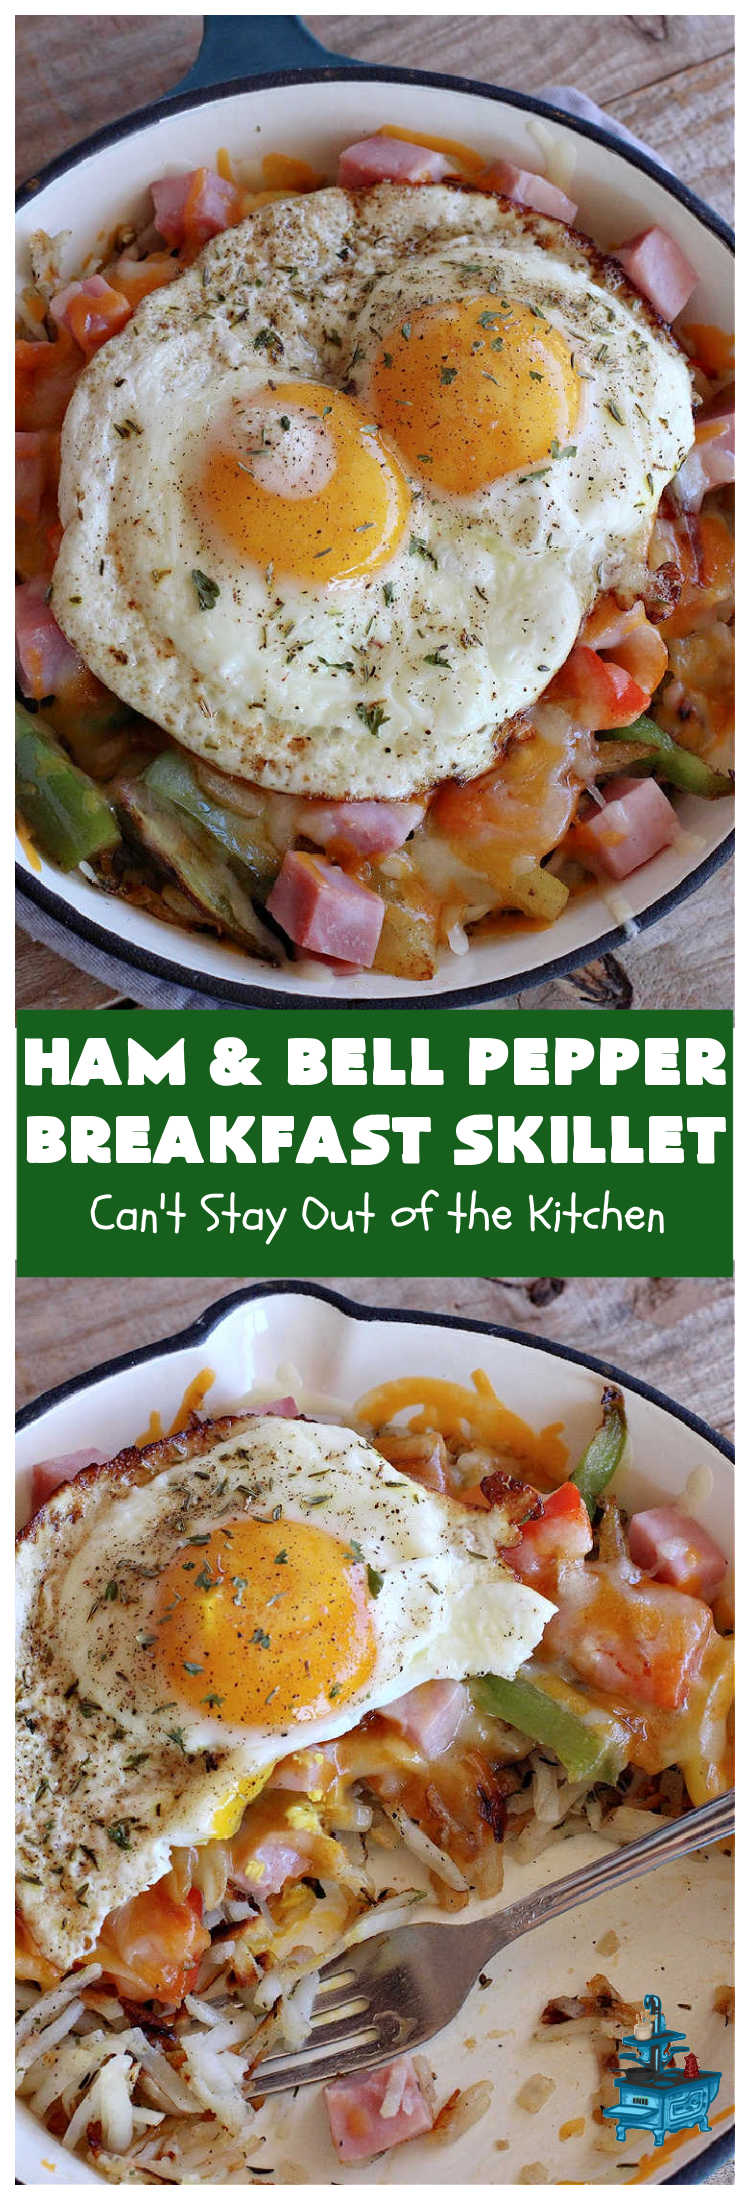 Ham and Bell Pepper Breakfast Skillet | Can't Stay Out of the Kitchen